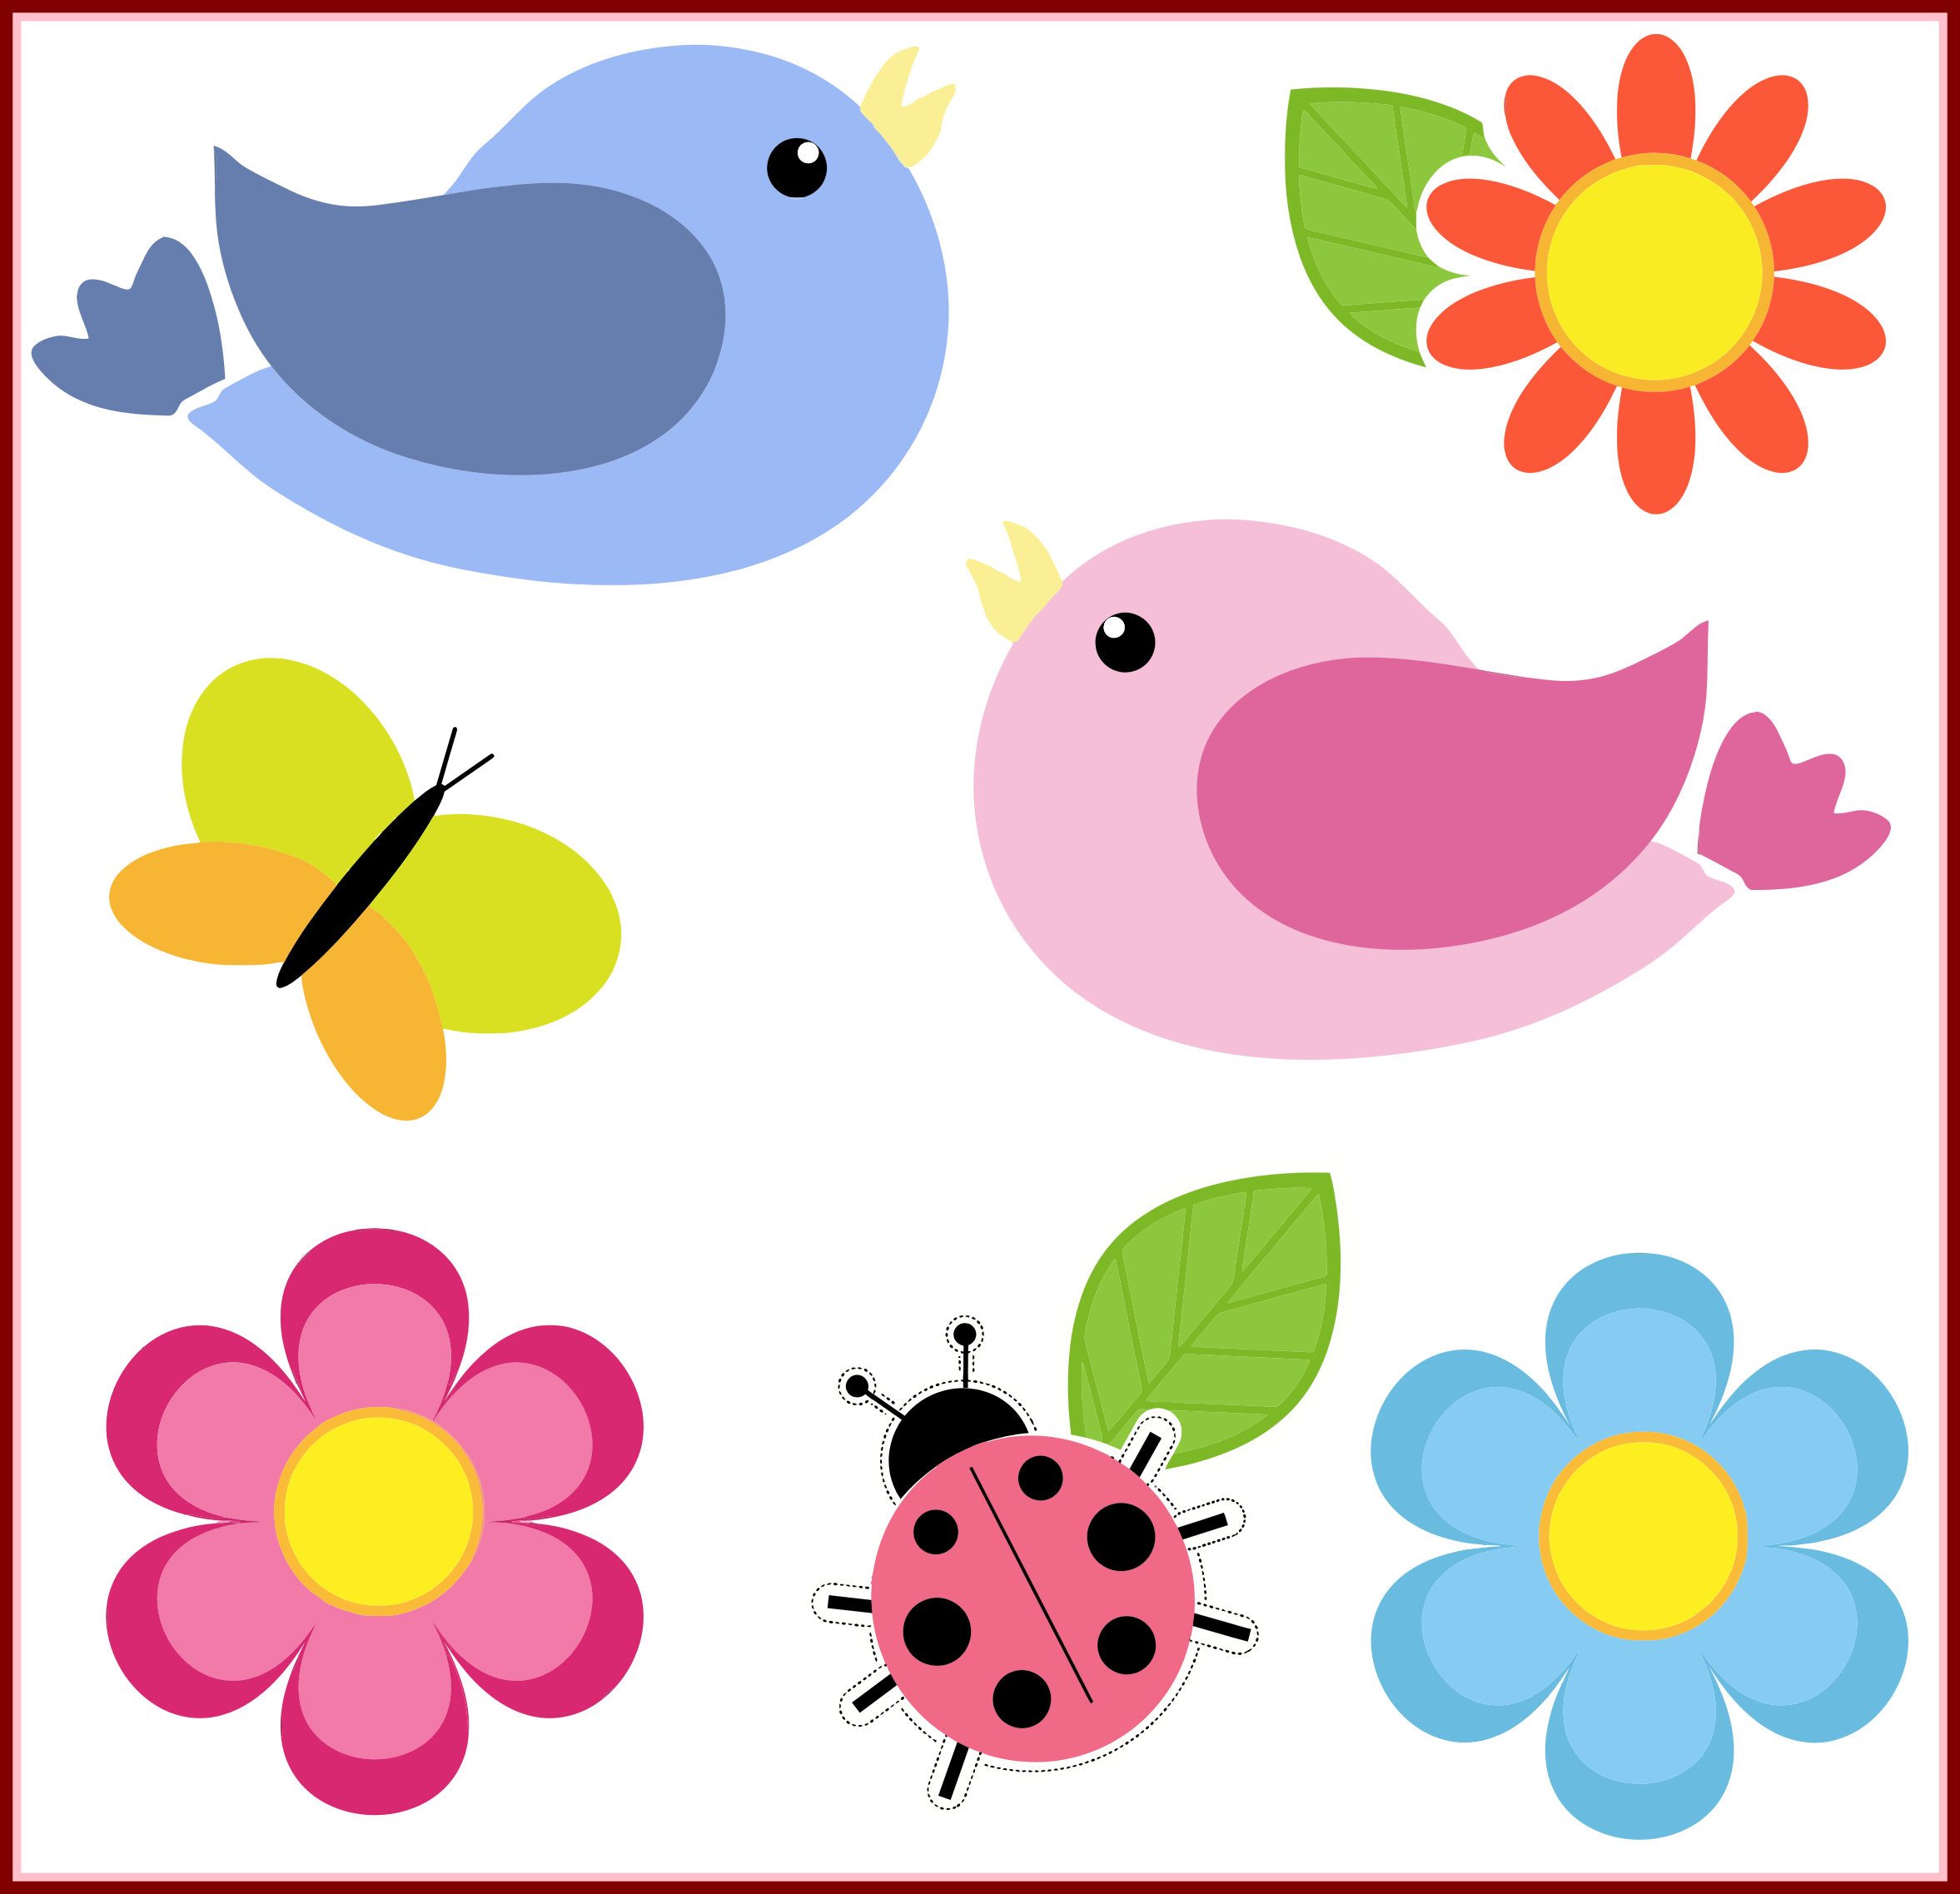 Marvelous Birds Butterfly Ladybug And Flowers No Background - Clipart Birds Butterflies And Flowers (2354x2275)